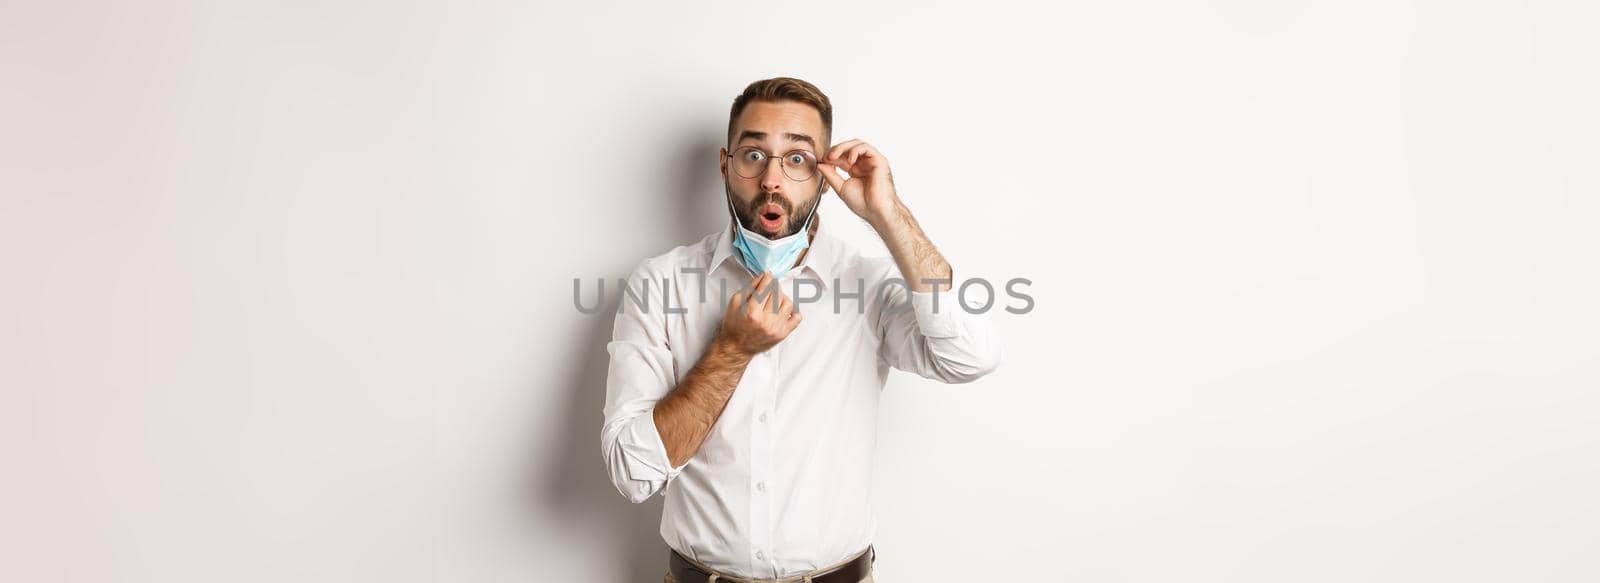 Covid-19, social distancing and quarantine concept. Impressed business man take off medical mask, looking surprised, standing over white background.